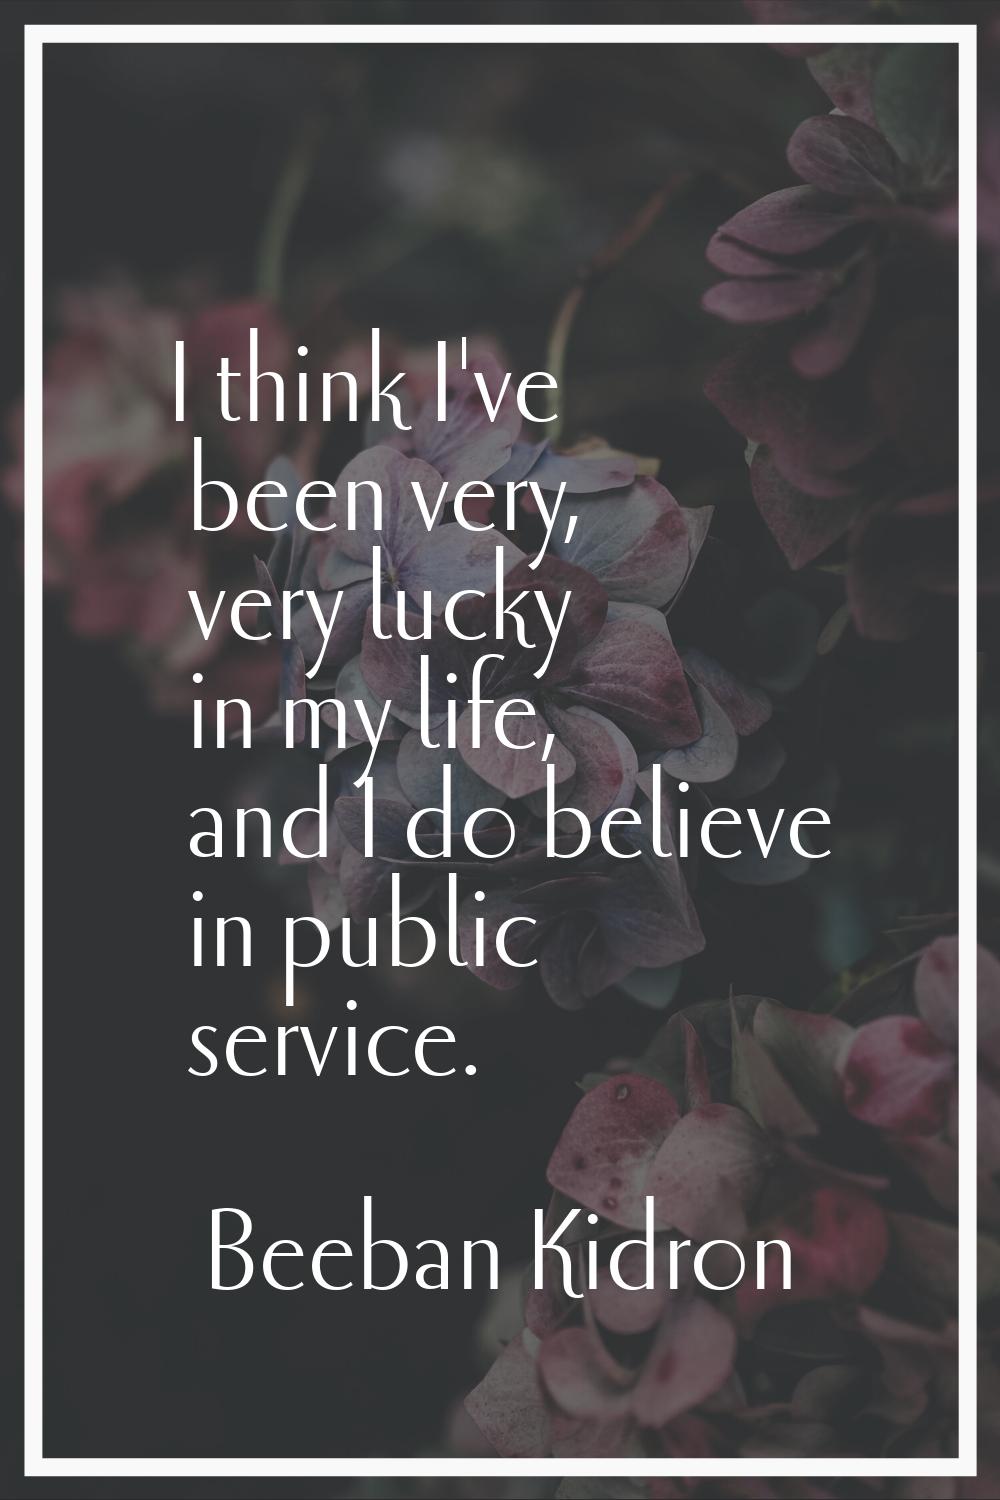 I think I've been very, very lucky in my life, and I do believe in public service.